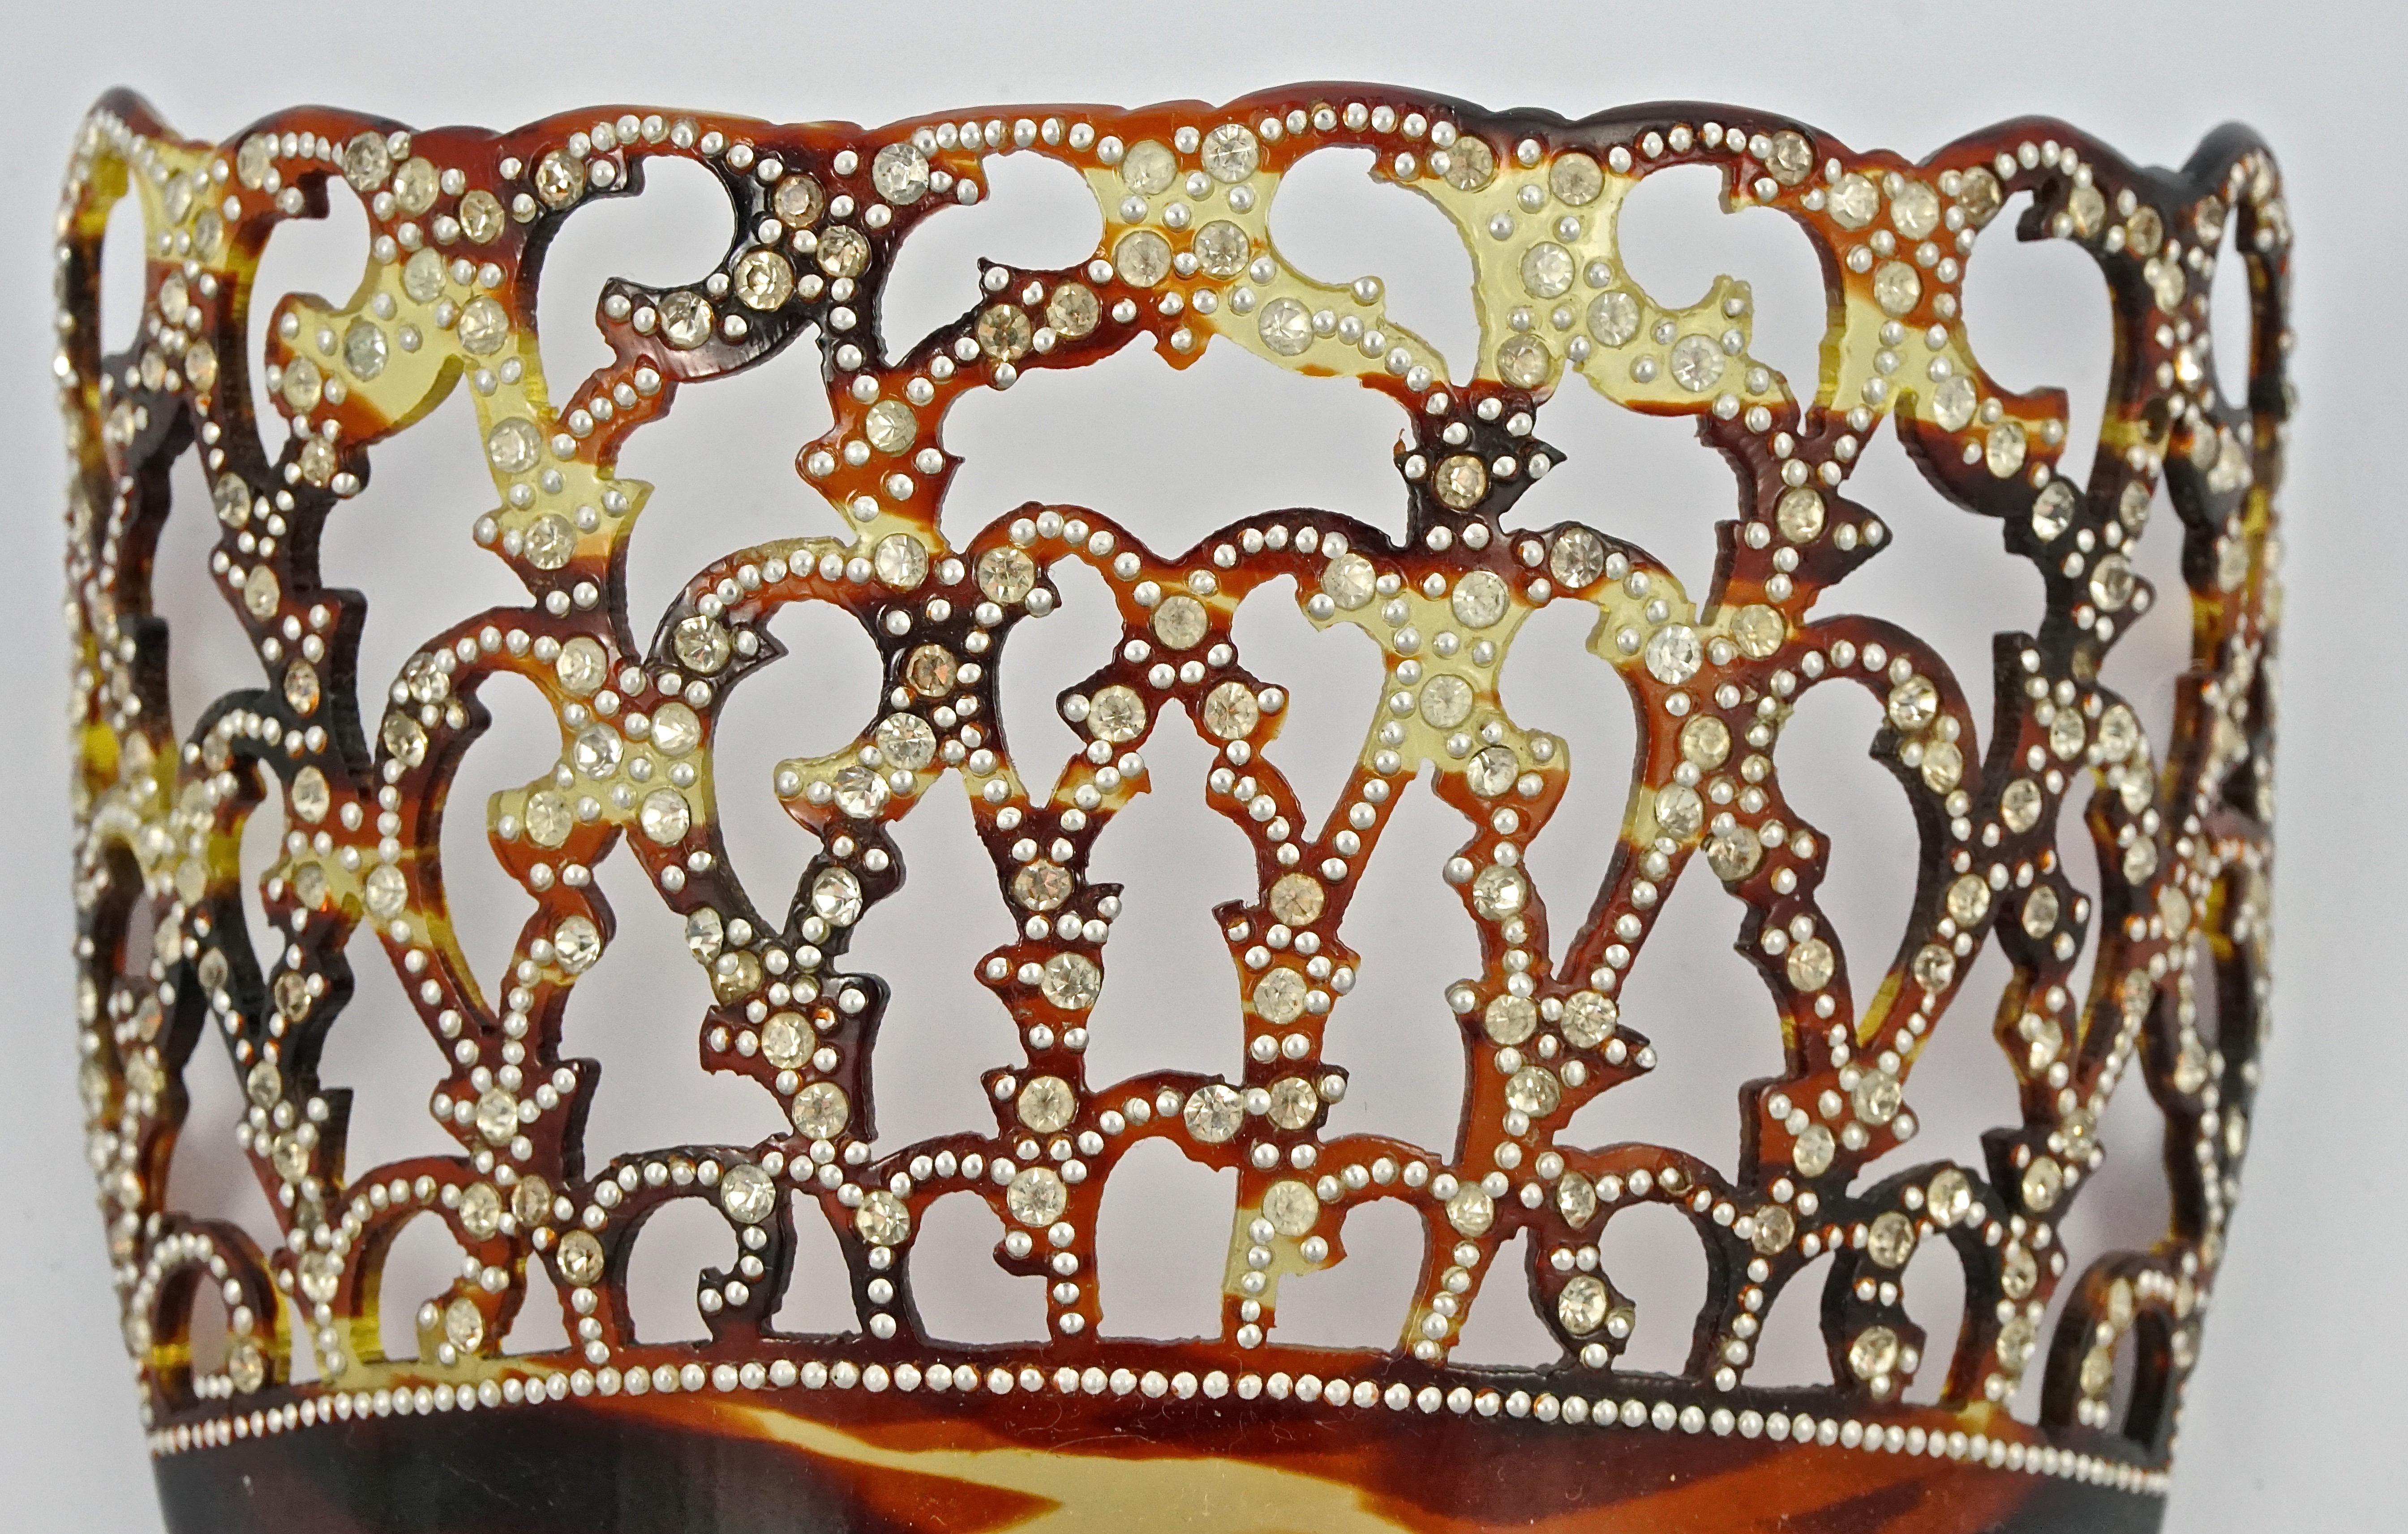 
Lovely faux tortoiseshell seven prong mantilla hair comb, featuring clear faceted rhinestones and metal dot decoration. Measuring length 10.3cm / 4 inches by width 9.8cm / 3.85 inches. The hair comb is in very good condition.

This is a beautiful